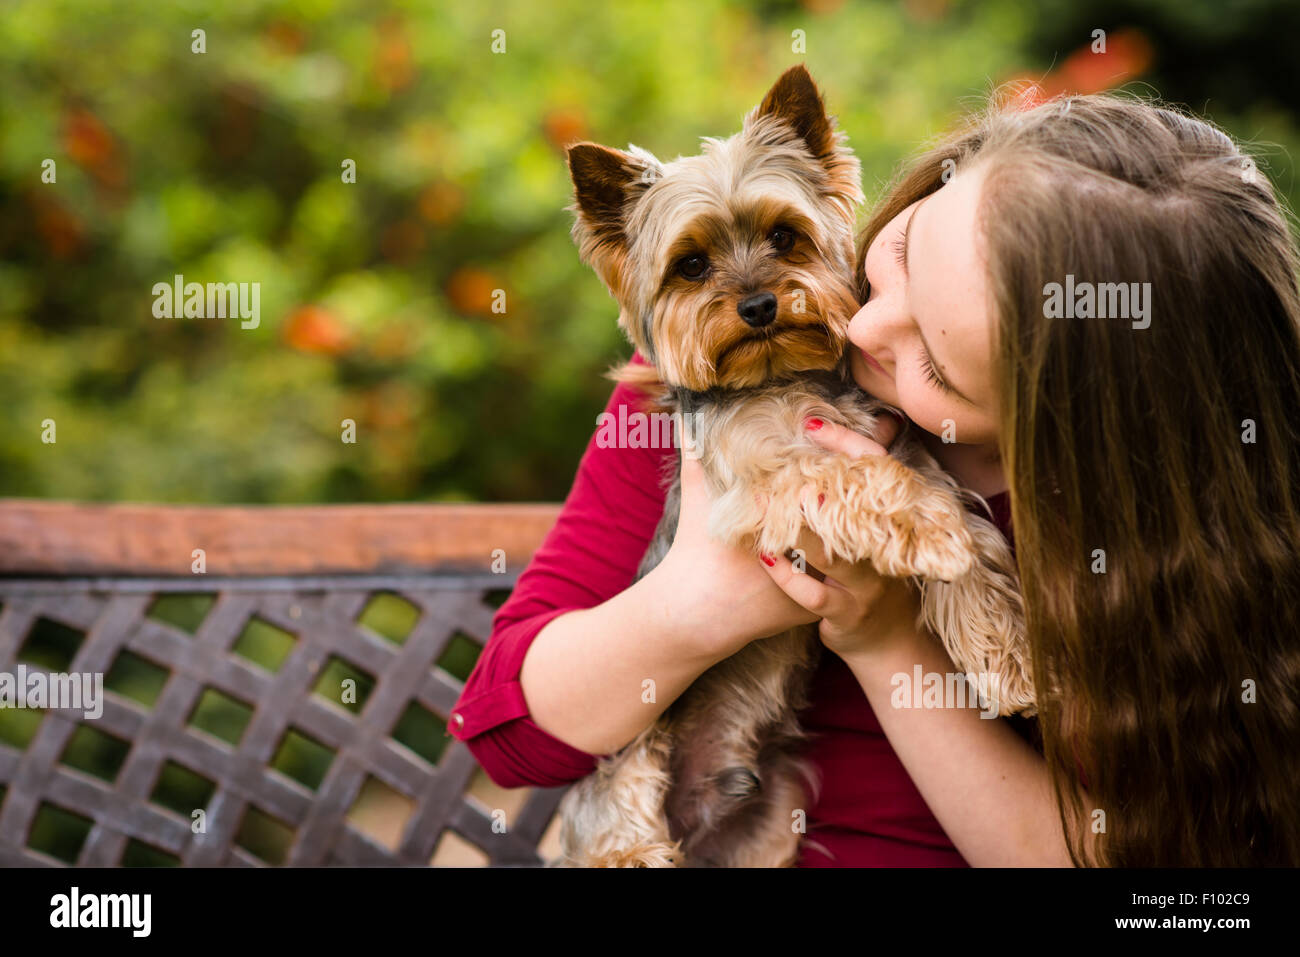 Girl kissing her Yorkshire dog sitting on bench outdoor Stock Photo